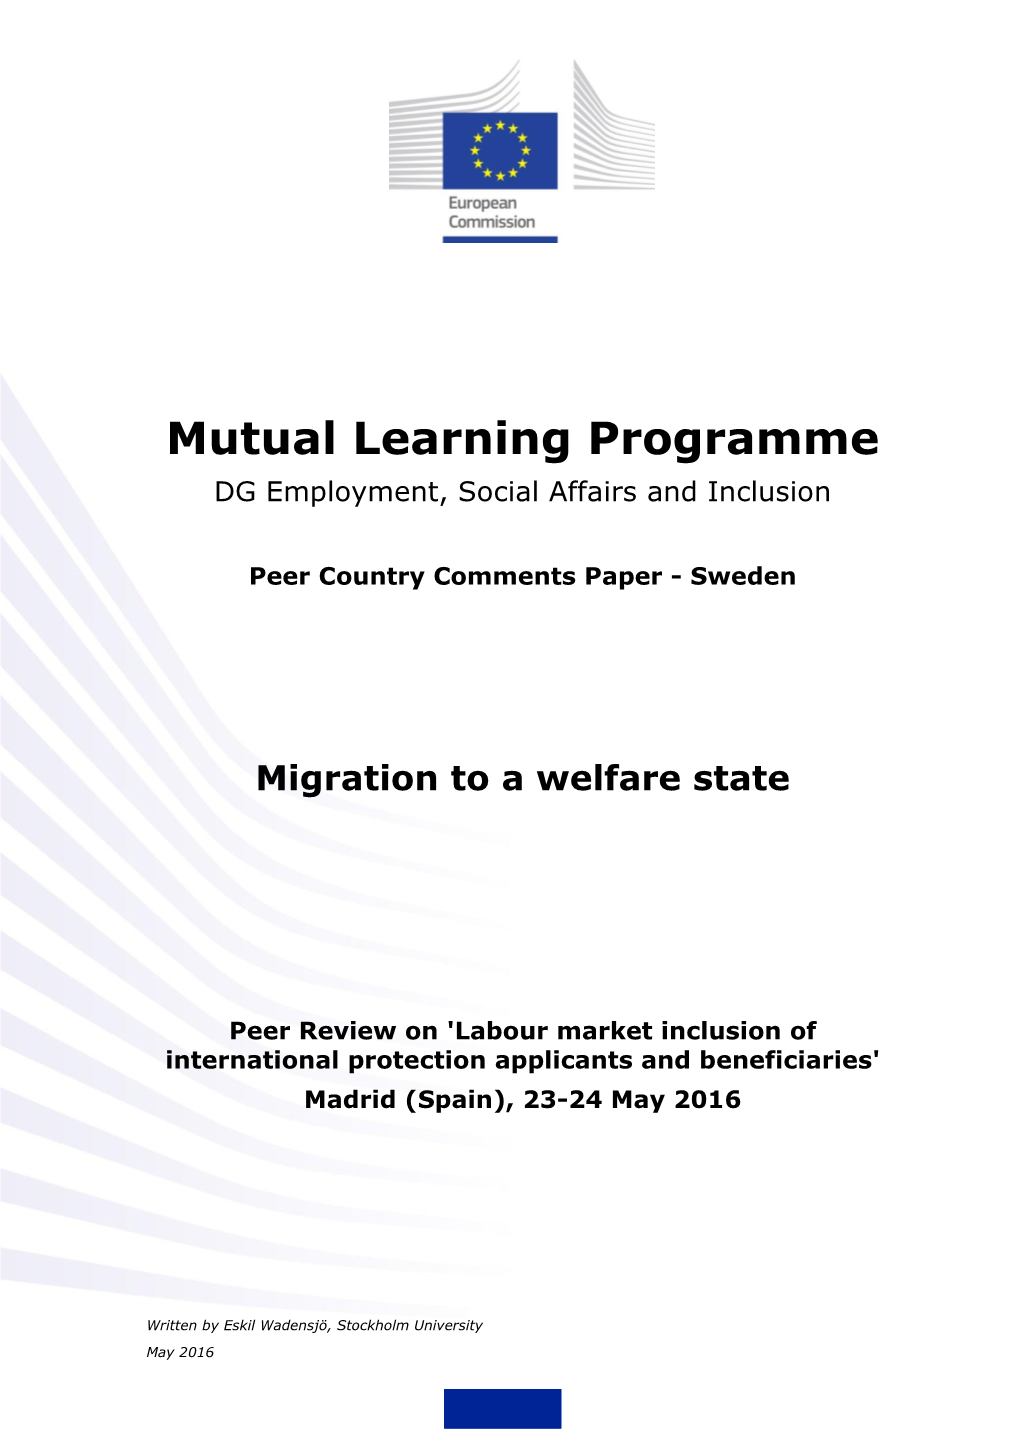 Mutual Learning Programme DG Employment, Social Affairs and Inclusion